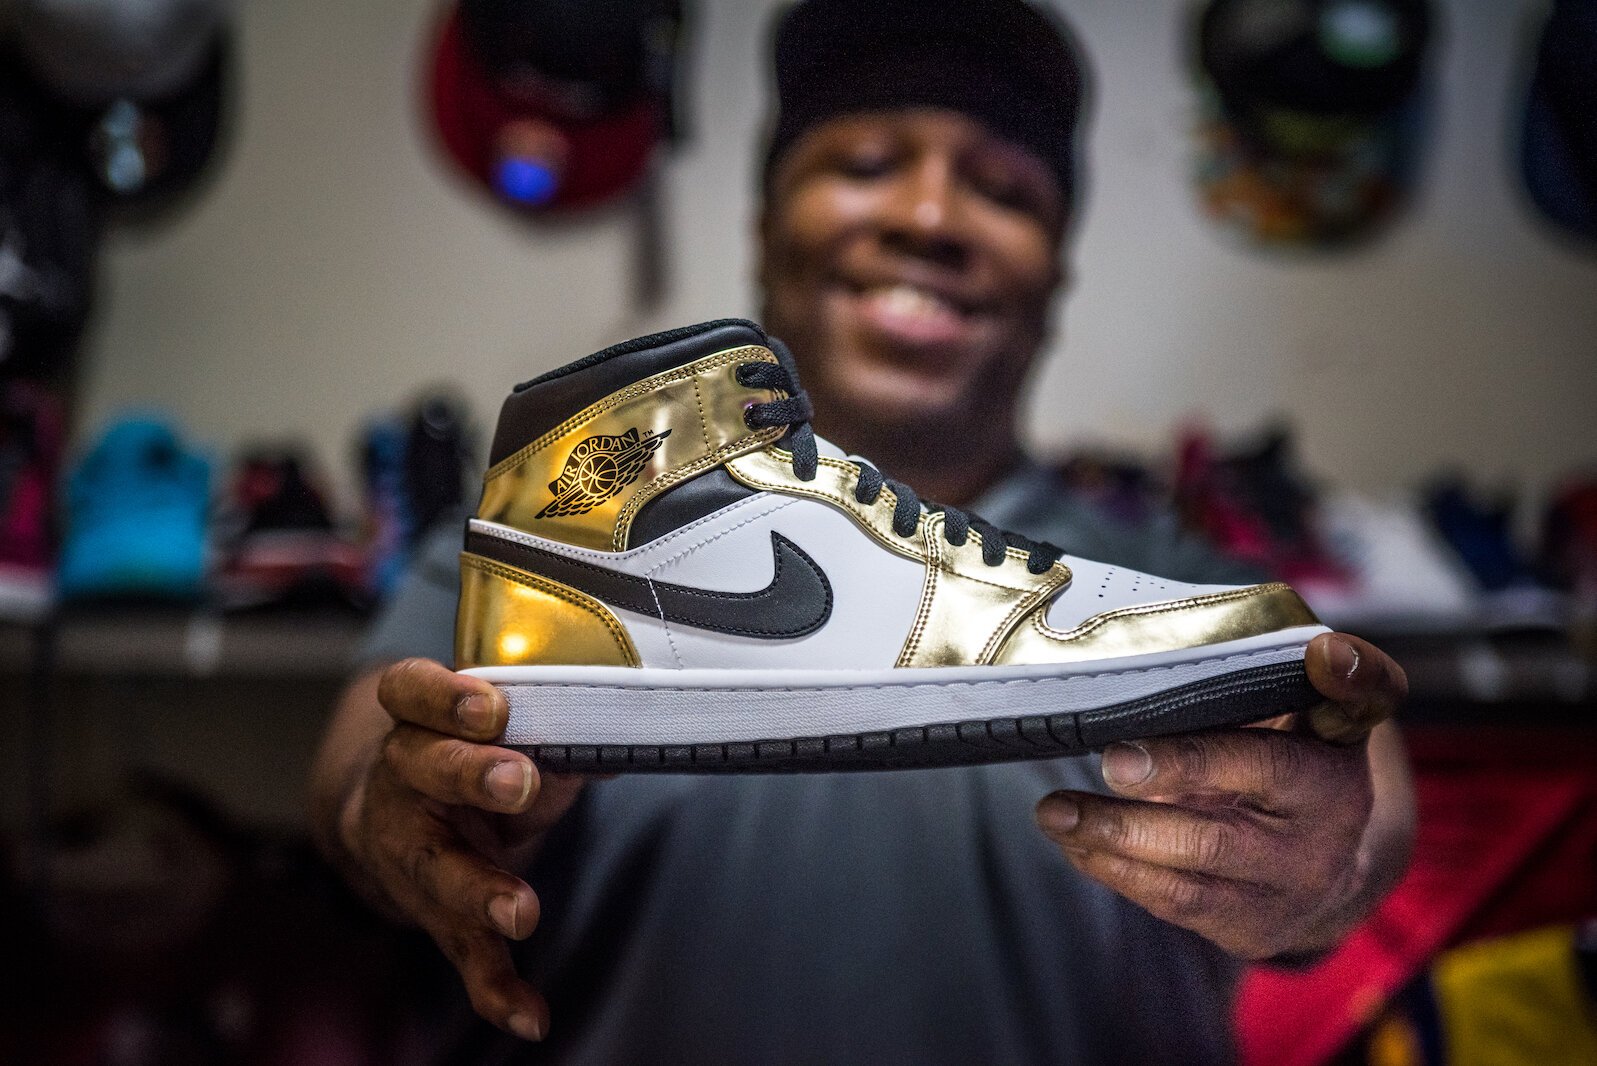 Roosevelt Lee-Fleming of Kalamazoo holds one of the sneakers that have been the focus of his business, The Drip Sneakers LLC.